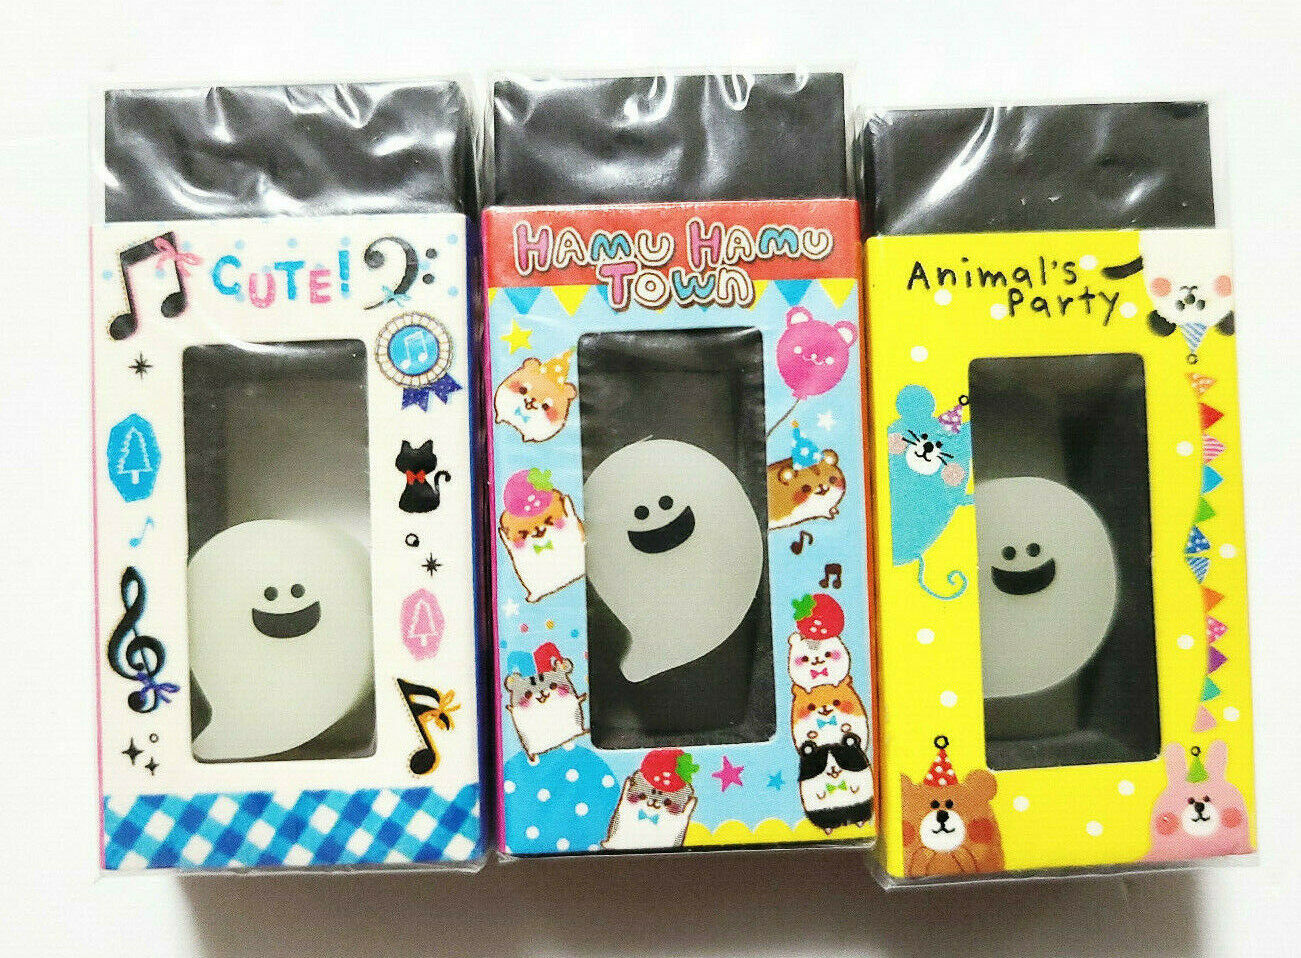 Primary image for Eraser in Eraser 3 pieces Cute Girl stationery glows in the dark! Ver1,